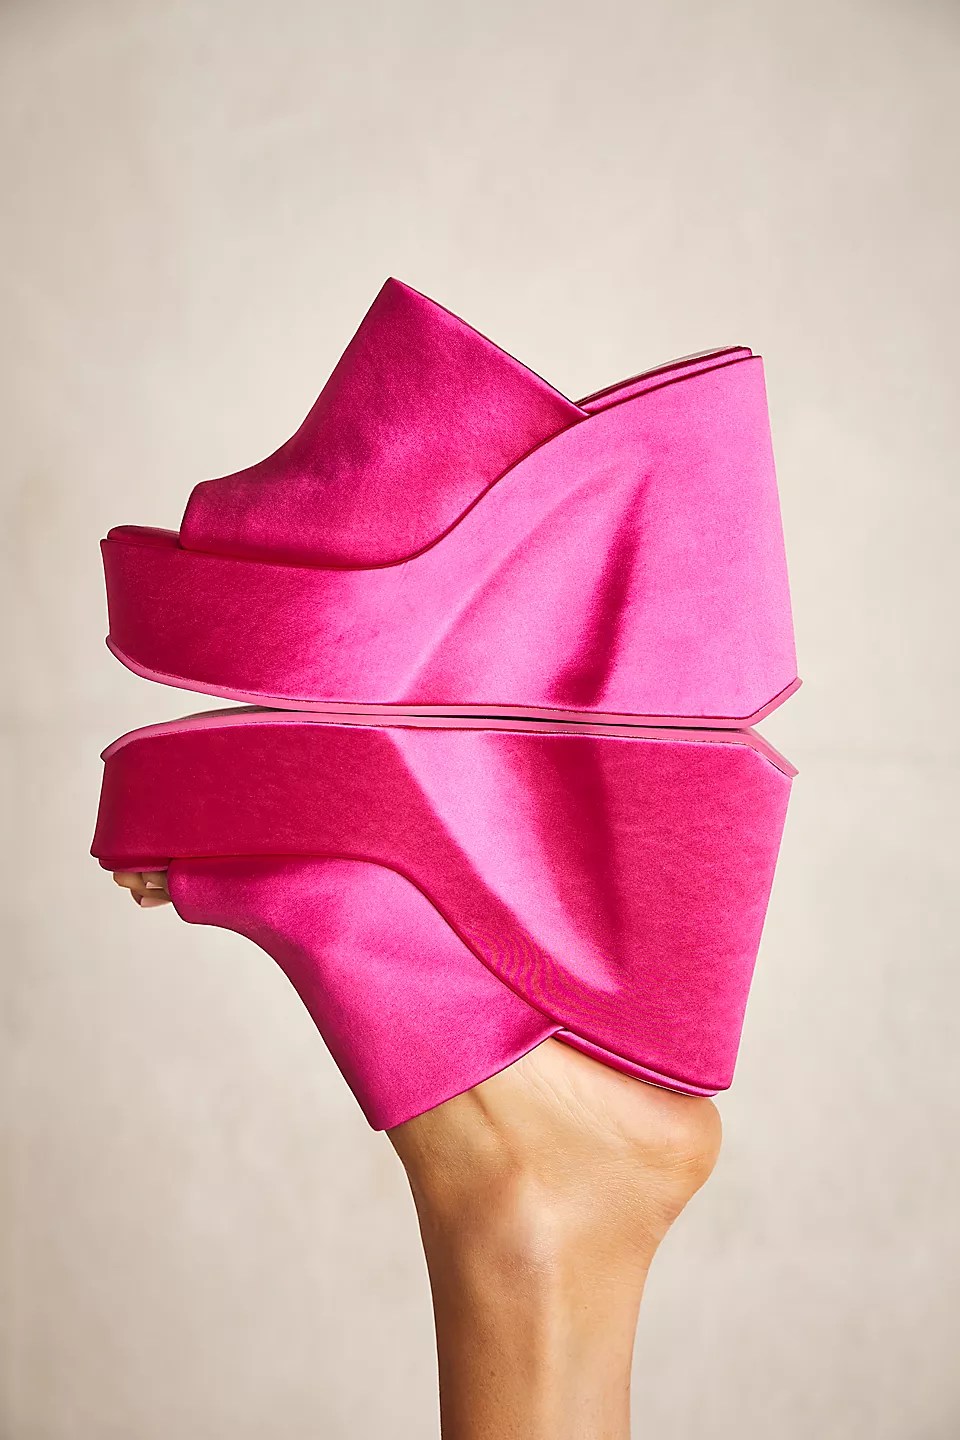 jeffrey campbell fuchsia satin wedge heels for holiday parties on dark brown background